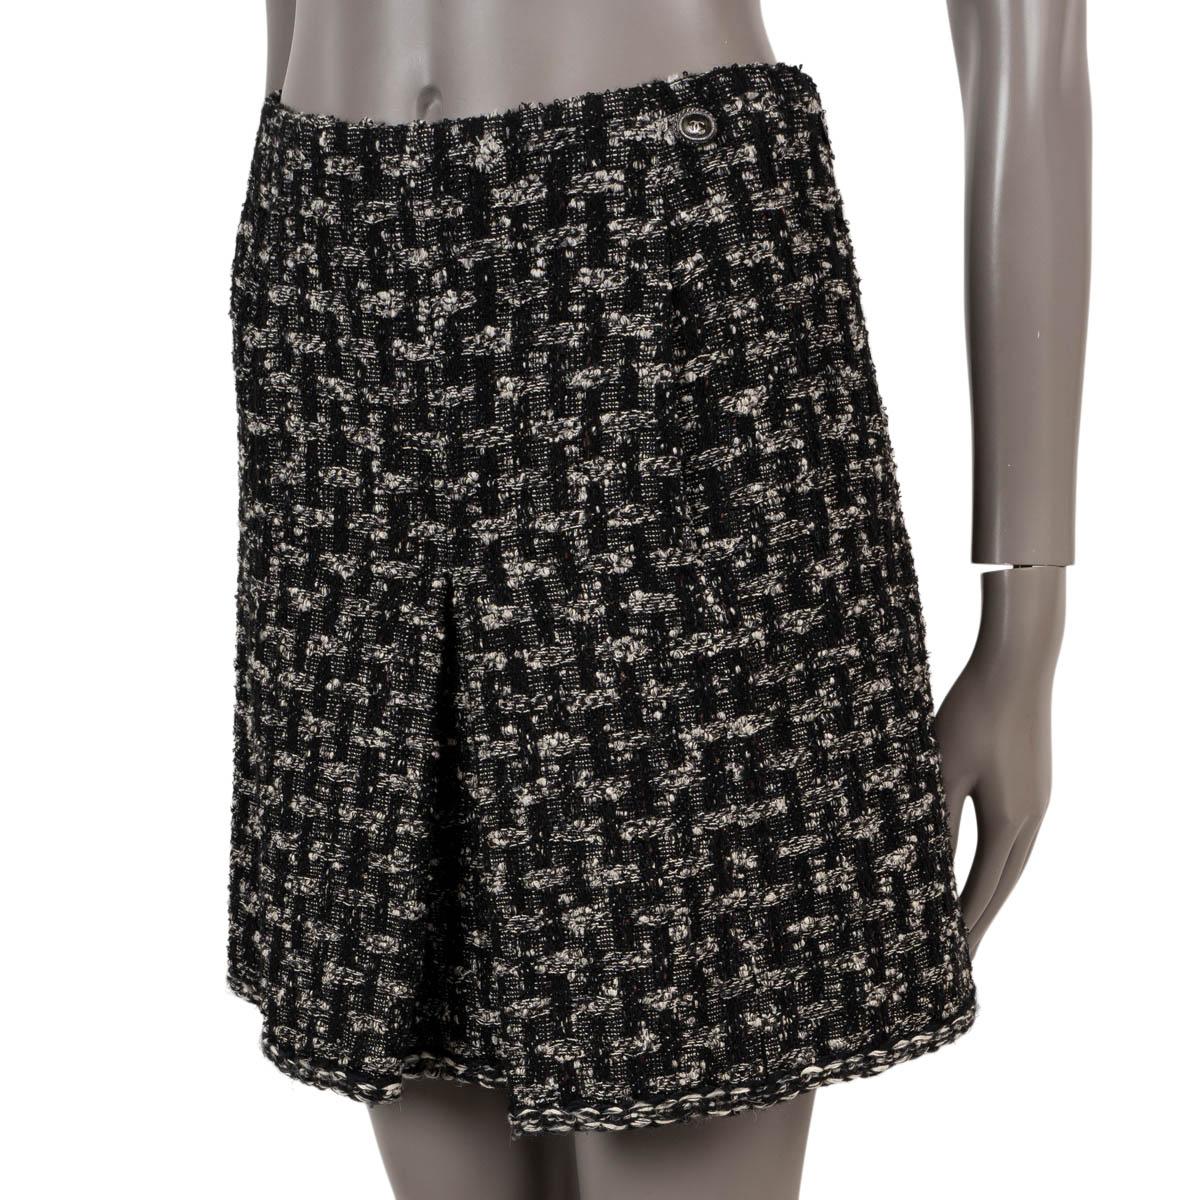 100% authentic Chanel box pleat tweed skirt in black and cream wool (36%), polyester (27%), cotton (18%), rayon (12%) and nylon (7%). Features a CC button at the waist, braided trims and to slit pockets on the front. Opens with a concealed zipper on